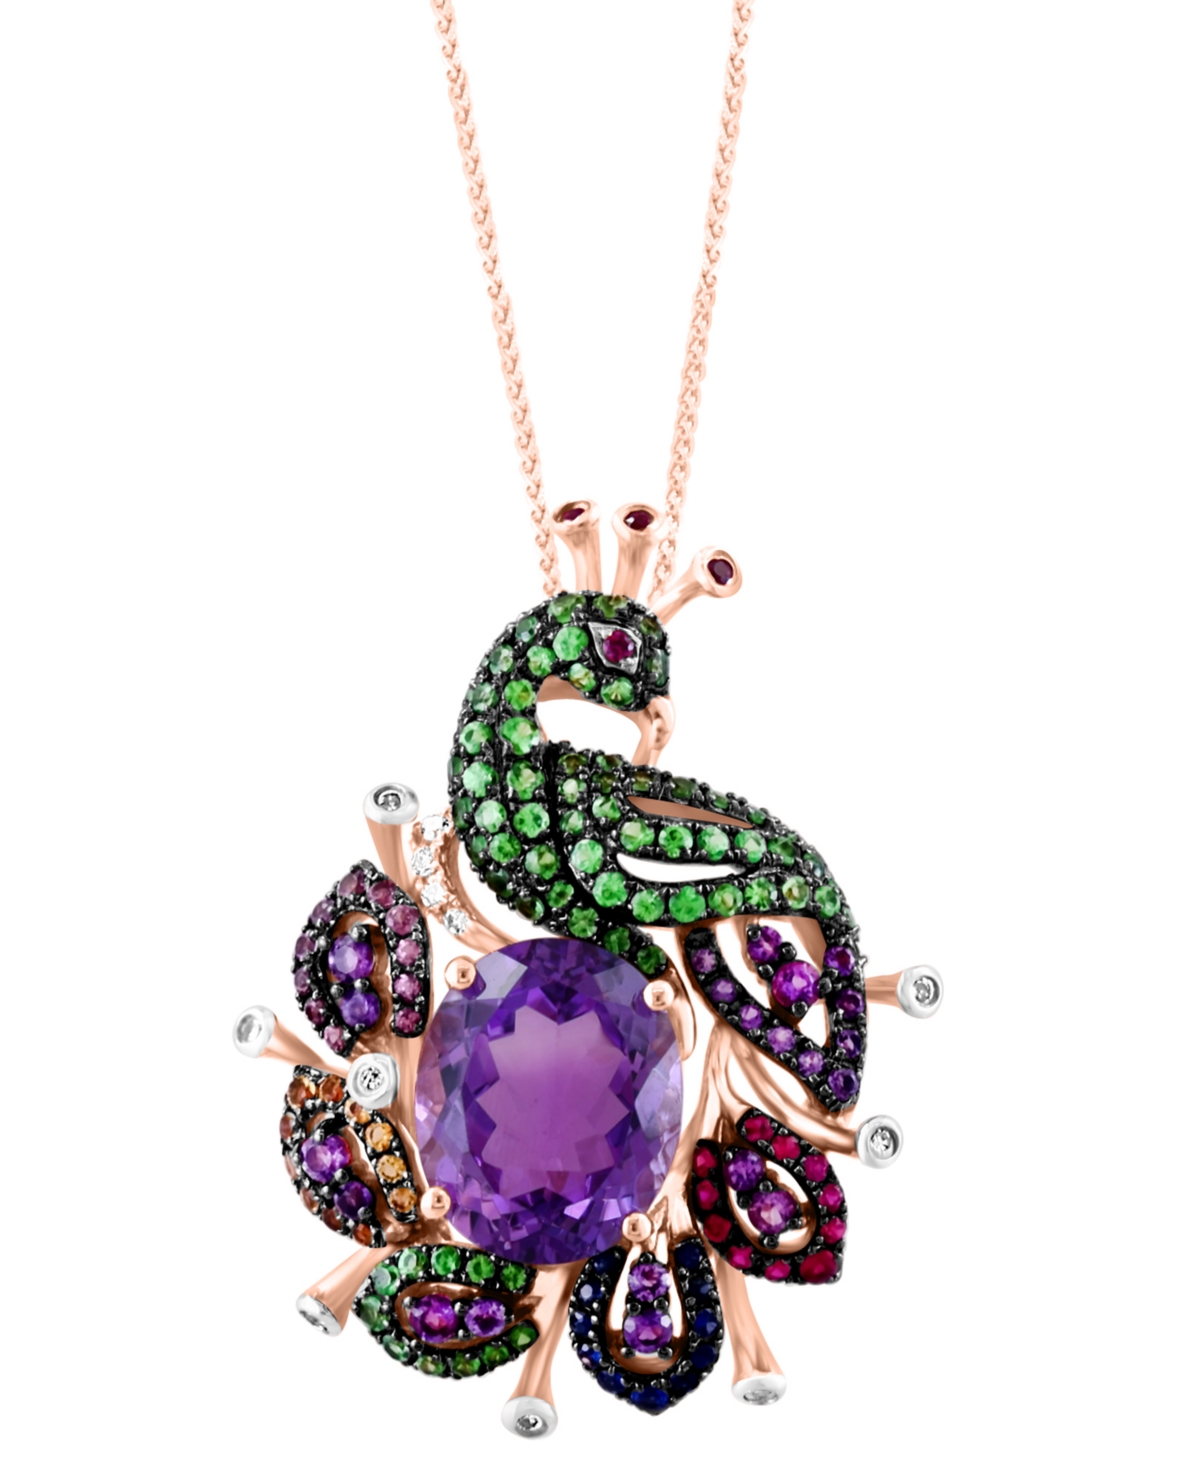 Lali Jewels Multi-gemstone (4-1/3 Ct. T.w.) Peacock Pendant Necklace In 14k Rose Gold, 16" + 2" Extender